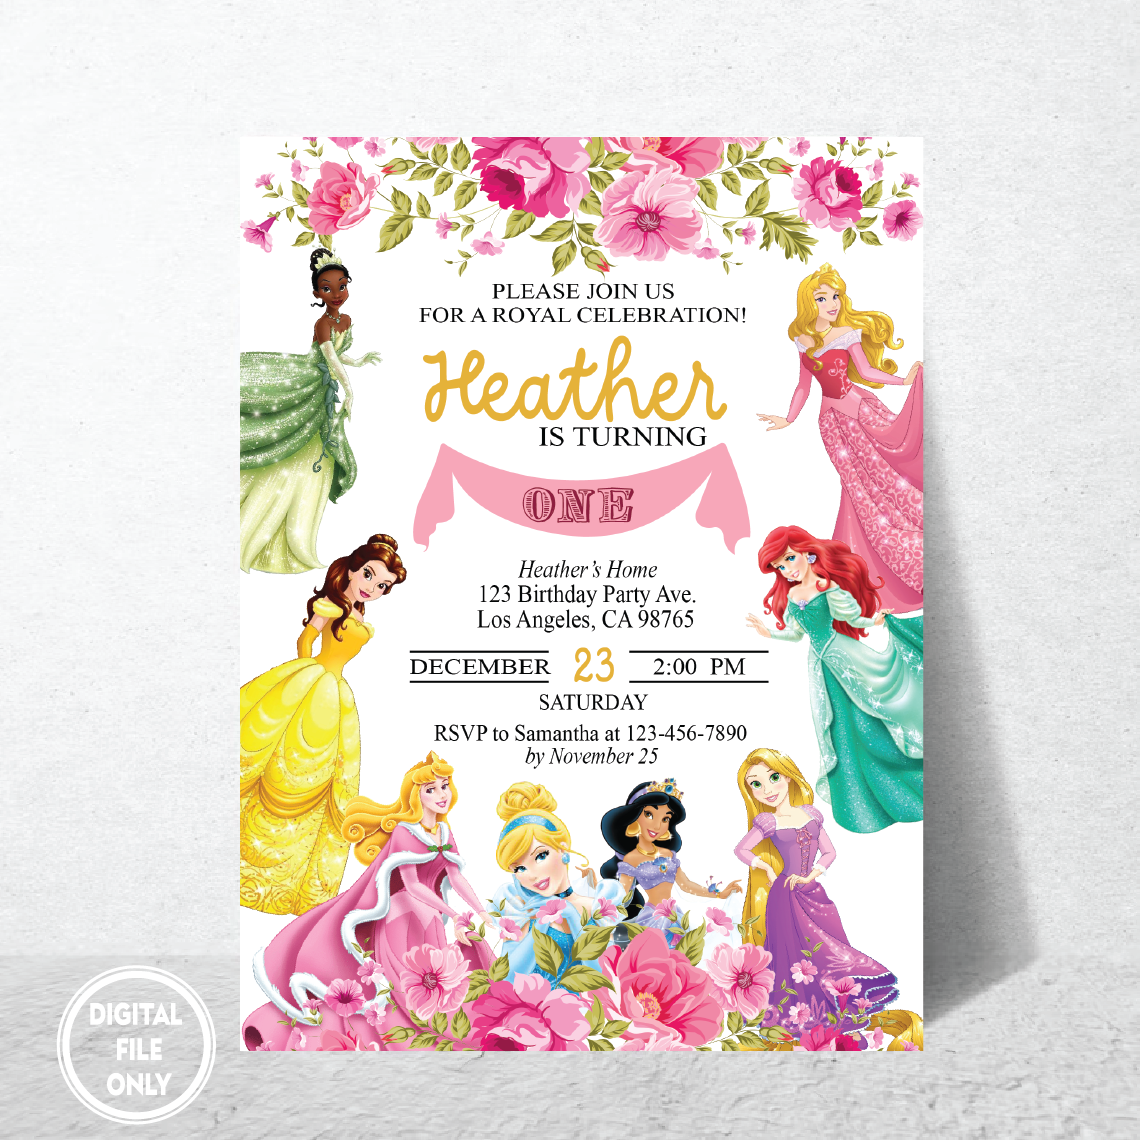 Personalized File Princess First Birthday Invitation Royal Rose Girl Celebration Invite Custom Printable Instant Download Digital or Printed PNG File Only